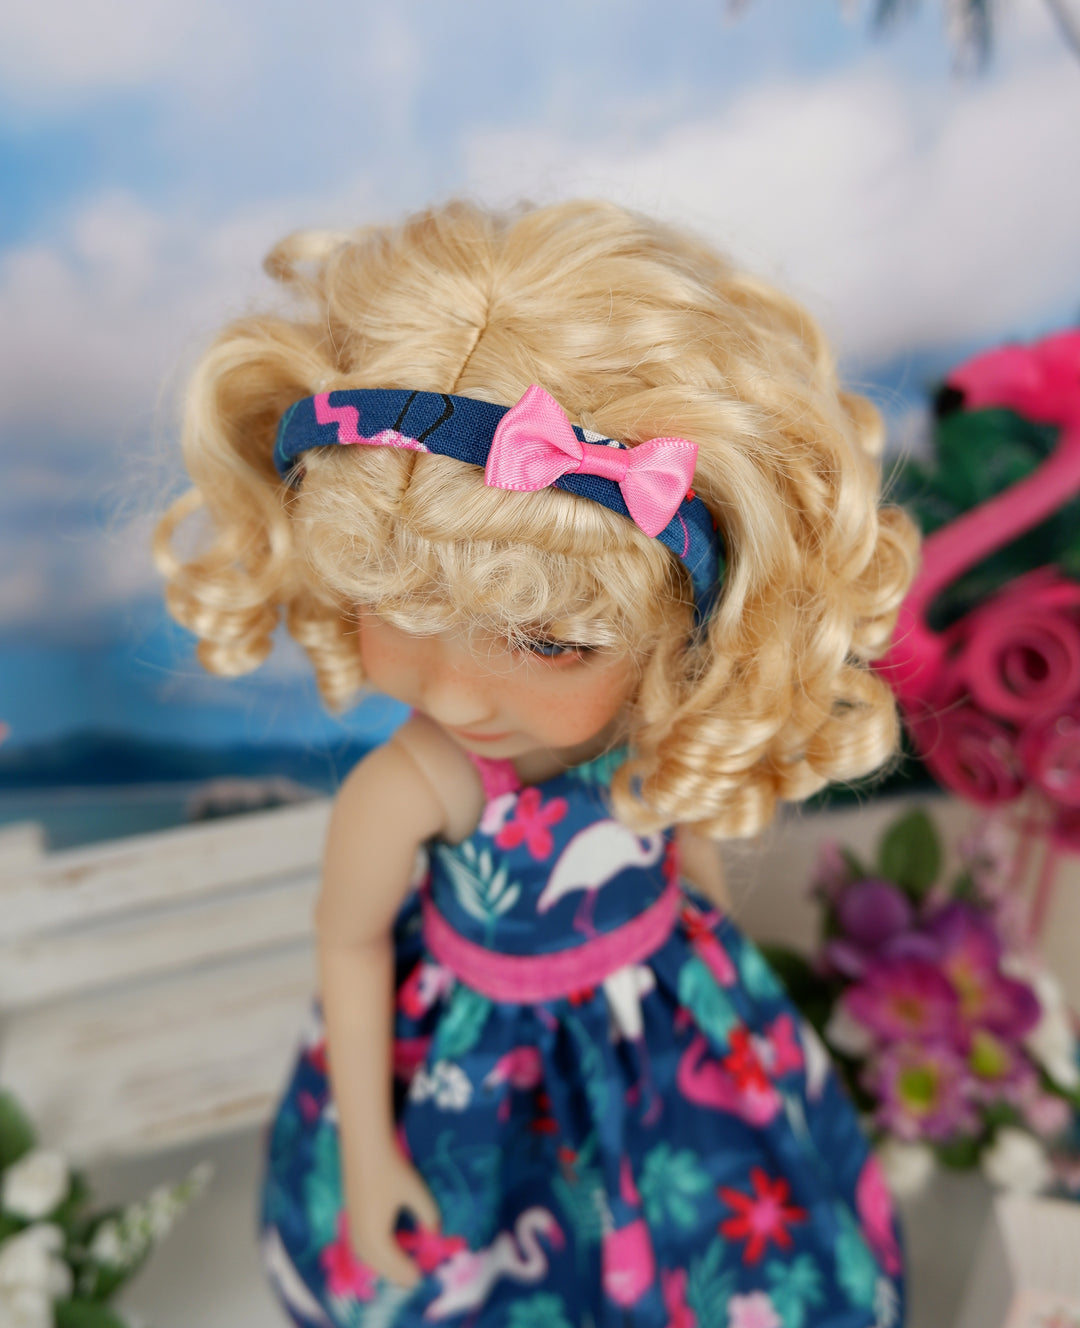 Tropical Flamingo - dress with shoes for Ruby Red Fashion Friends doll